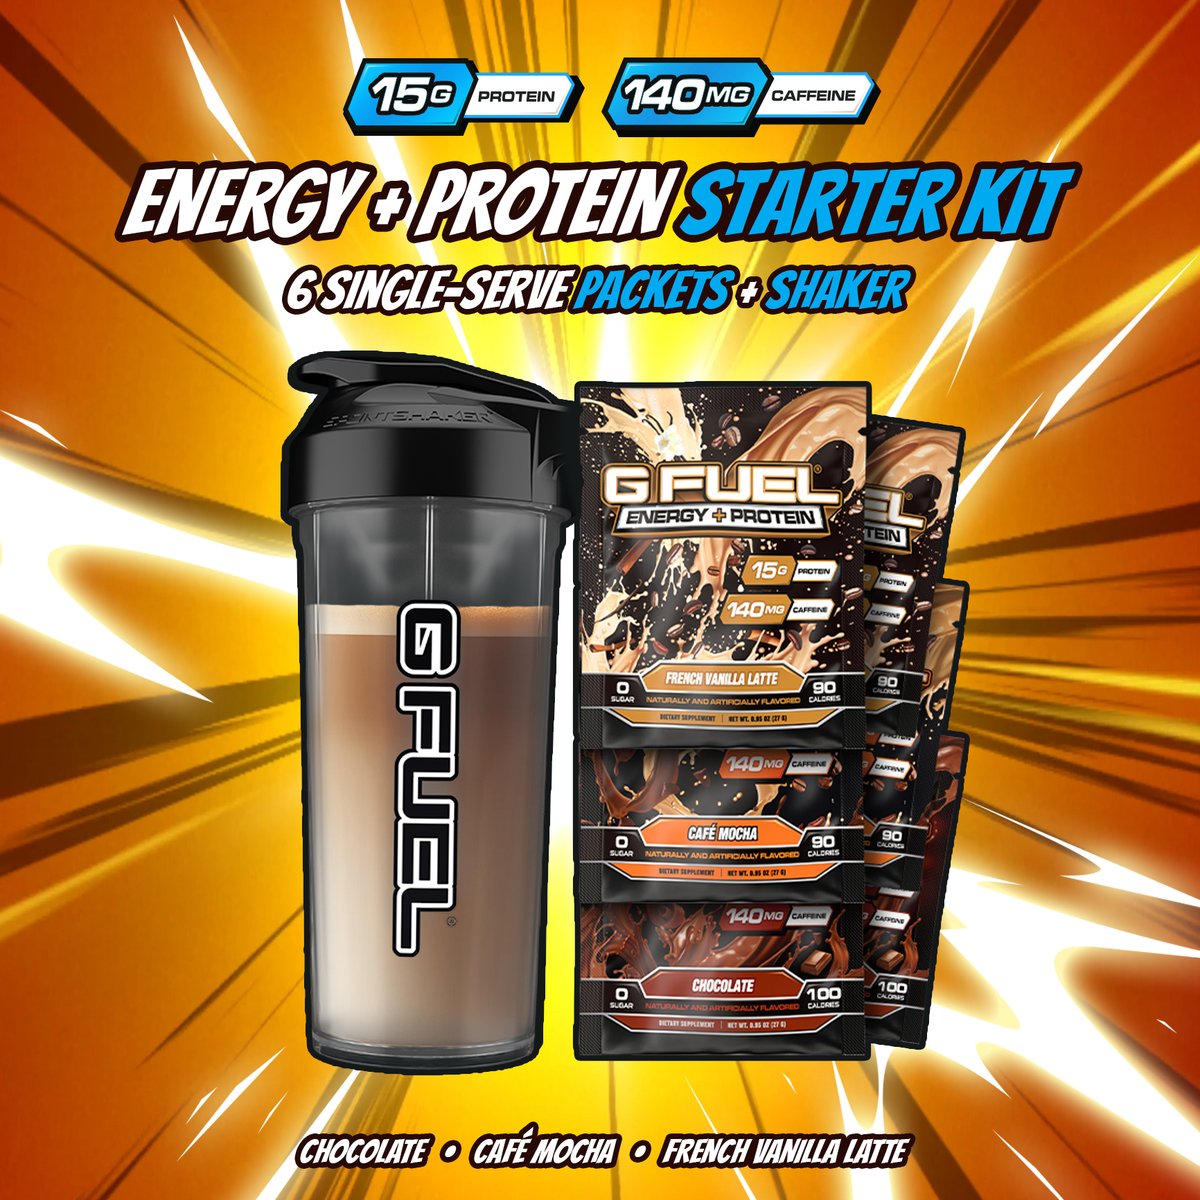 🤎💬 𝗥𝗧 + 𝗖𝗢𝗠𝗠𝗘𝗡𝗧 'PROTEIN' to win a BRAND-NEW #GFUEL ENERGY + PROTEIN STARTER KIT! 💪 2 winners picked on Monday to celebrate the launch! 🛒 𝗚𝗘𝗧 𝗬𝗢𝗨𝗥𝗦: GFUEL.com/collections/en…